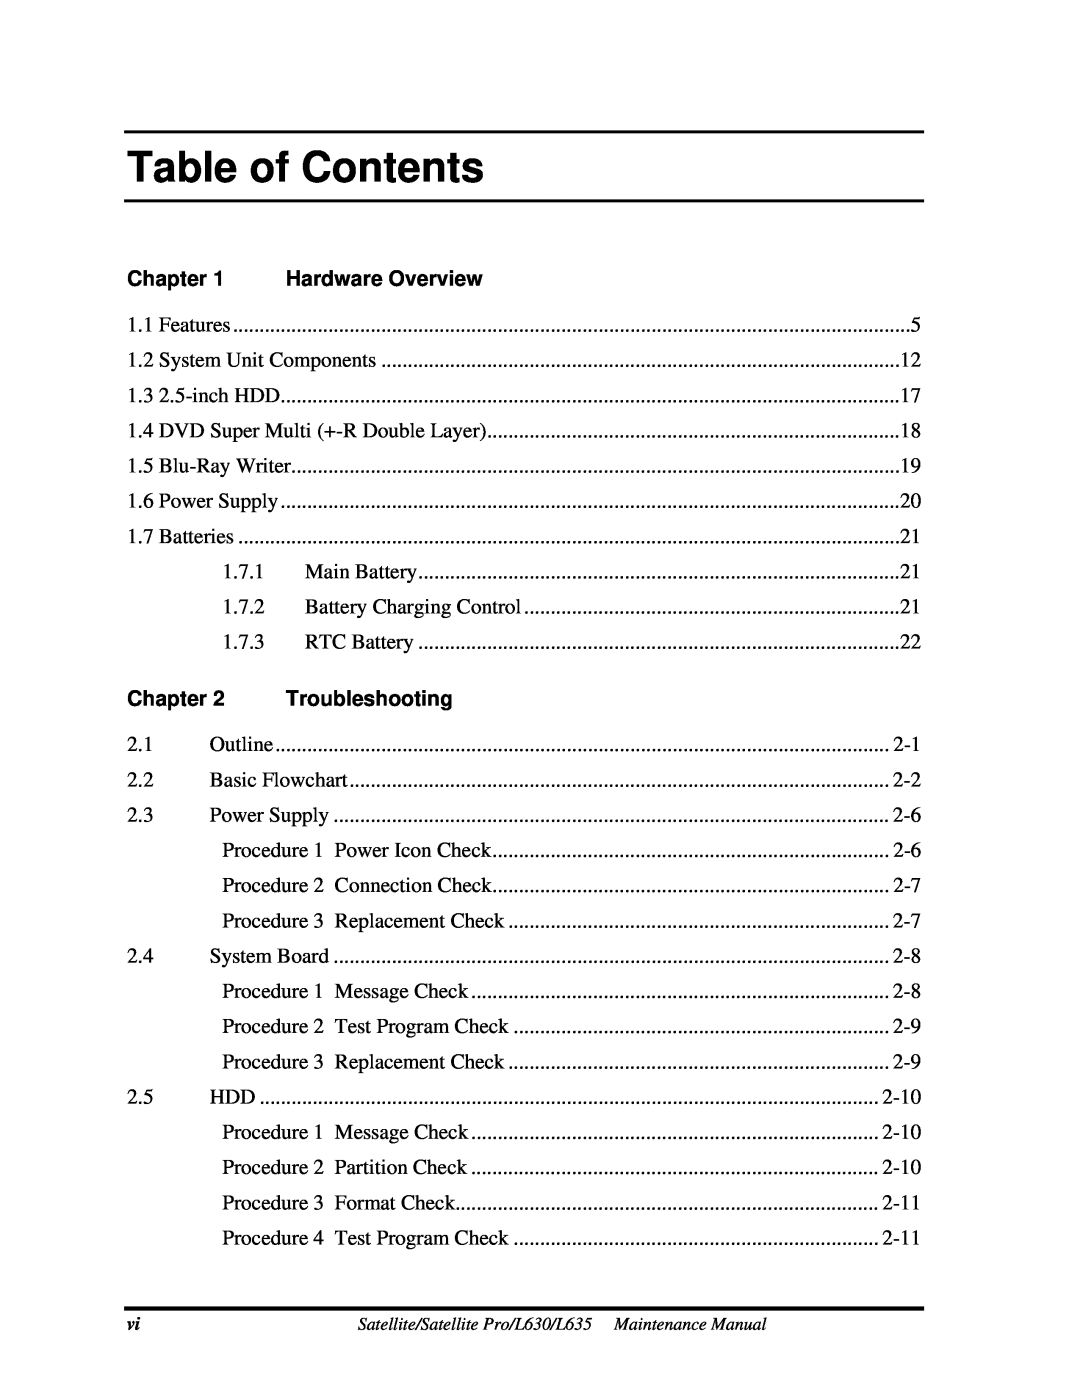 Toshiba L635, L630 manual Table of Contents, Chapter, Hardware Overview, Troubleshooting 